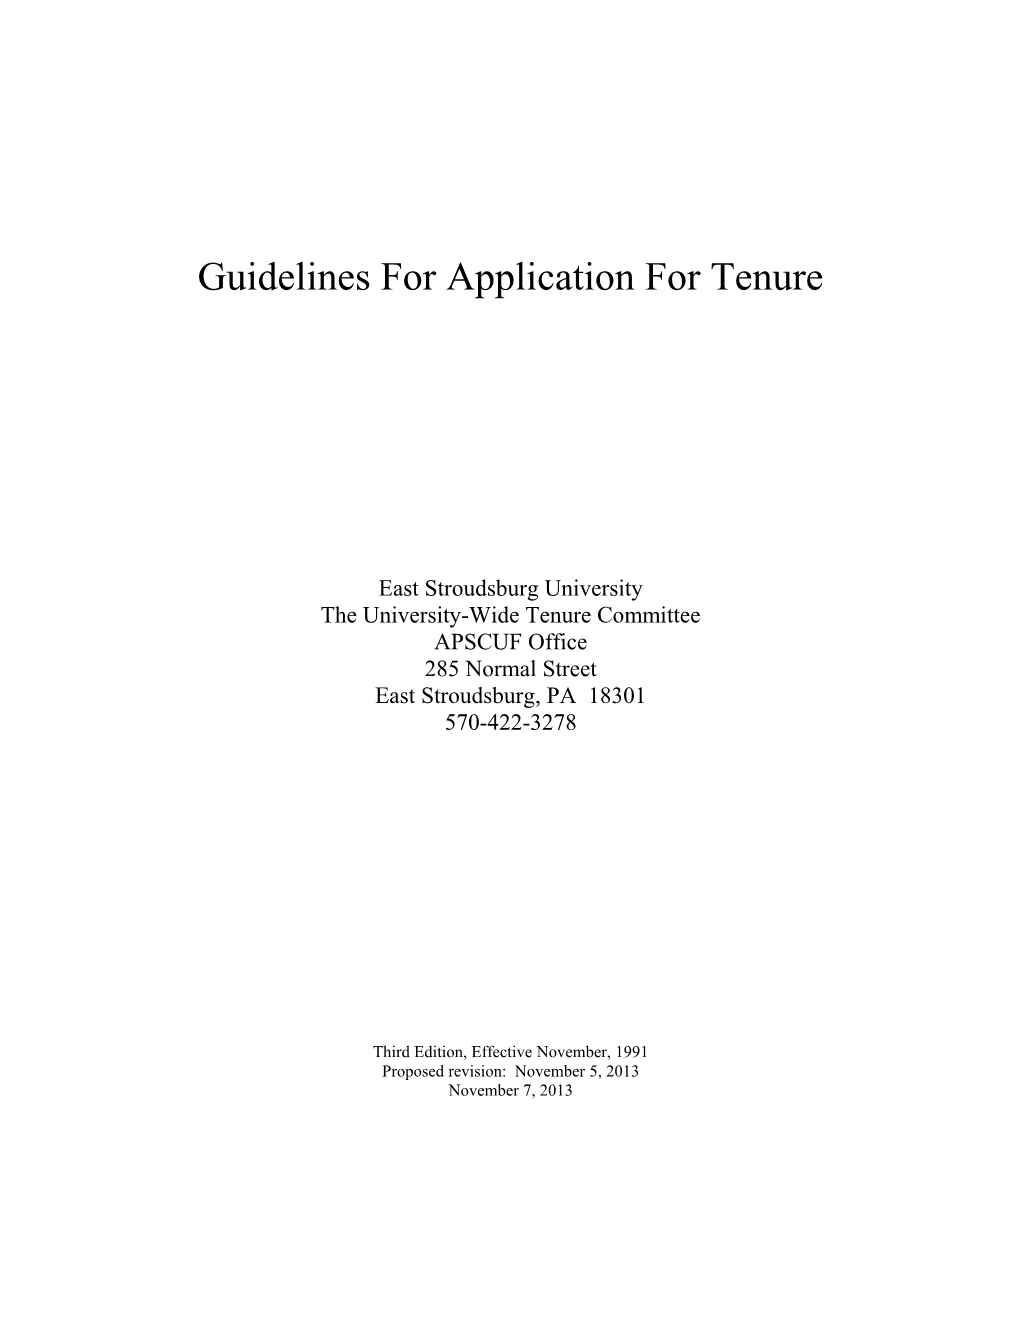 Guidelines for Application for Tenure